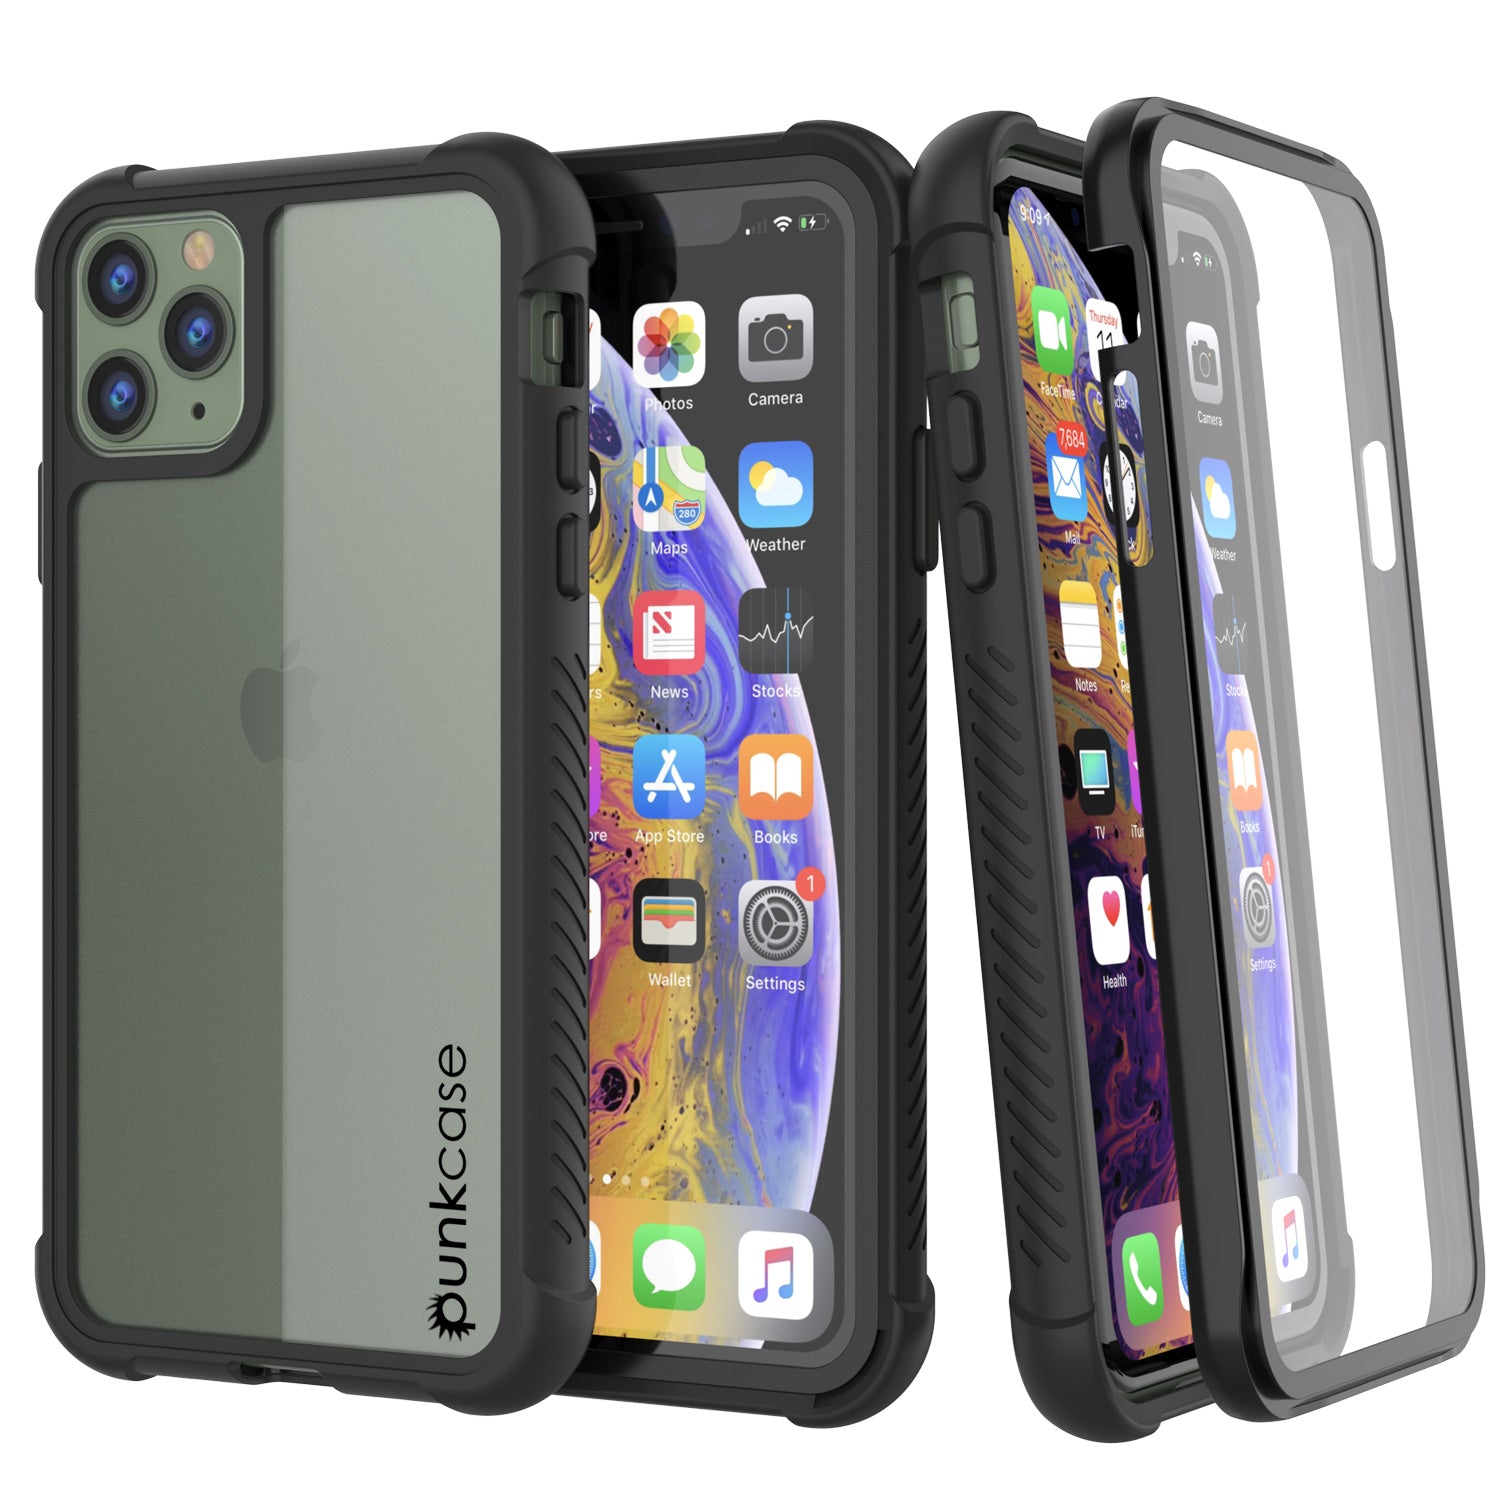 Punkcase Iphone 11 Pro Case Spartan Series Clear Rugged Heavy Duty